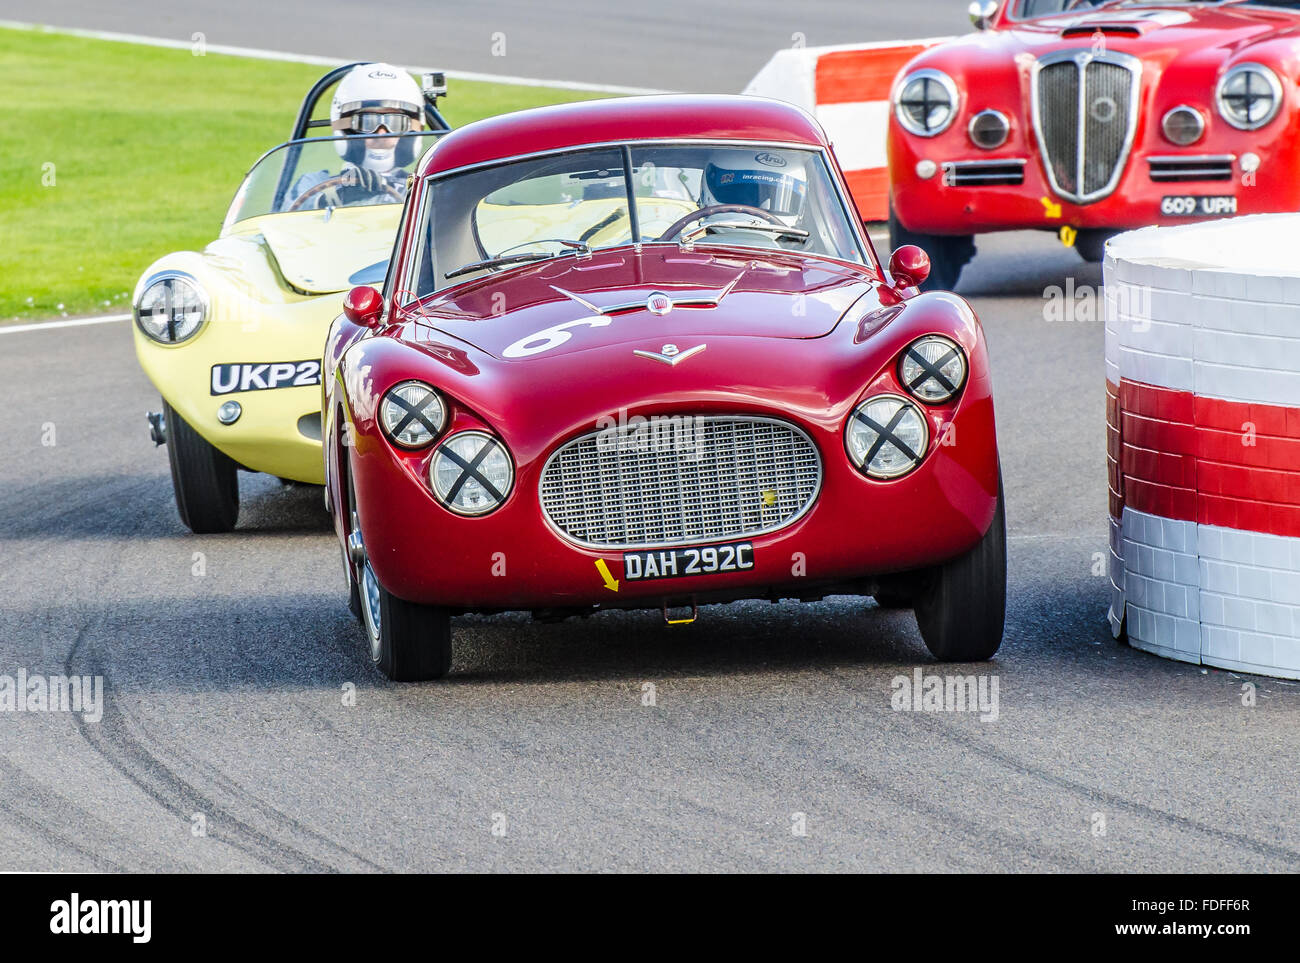 1954 Fiat 8V Berlinetta Coupe owned by Graham Burrows and raced by Ian Nuthall  at the 2015 Goodwood Revival Stock Photo